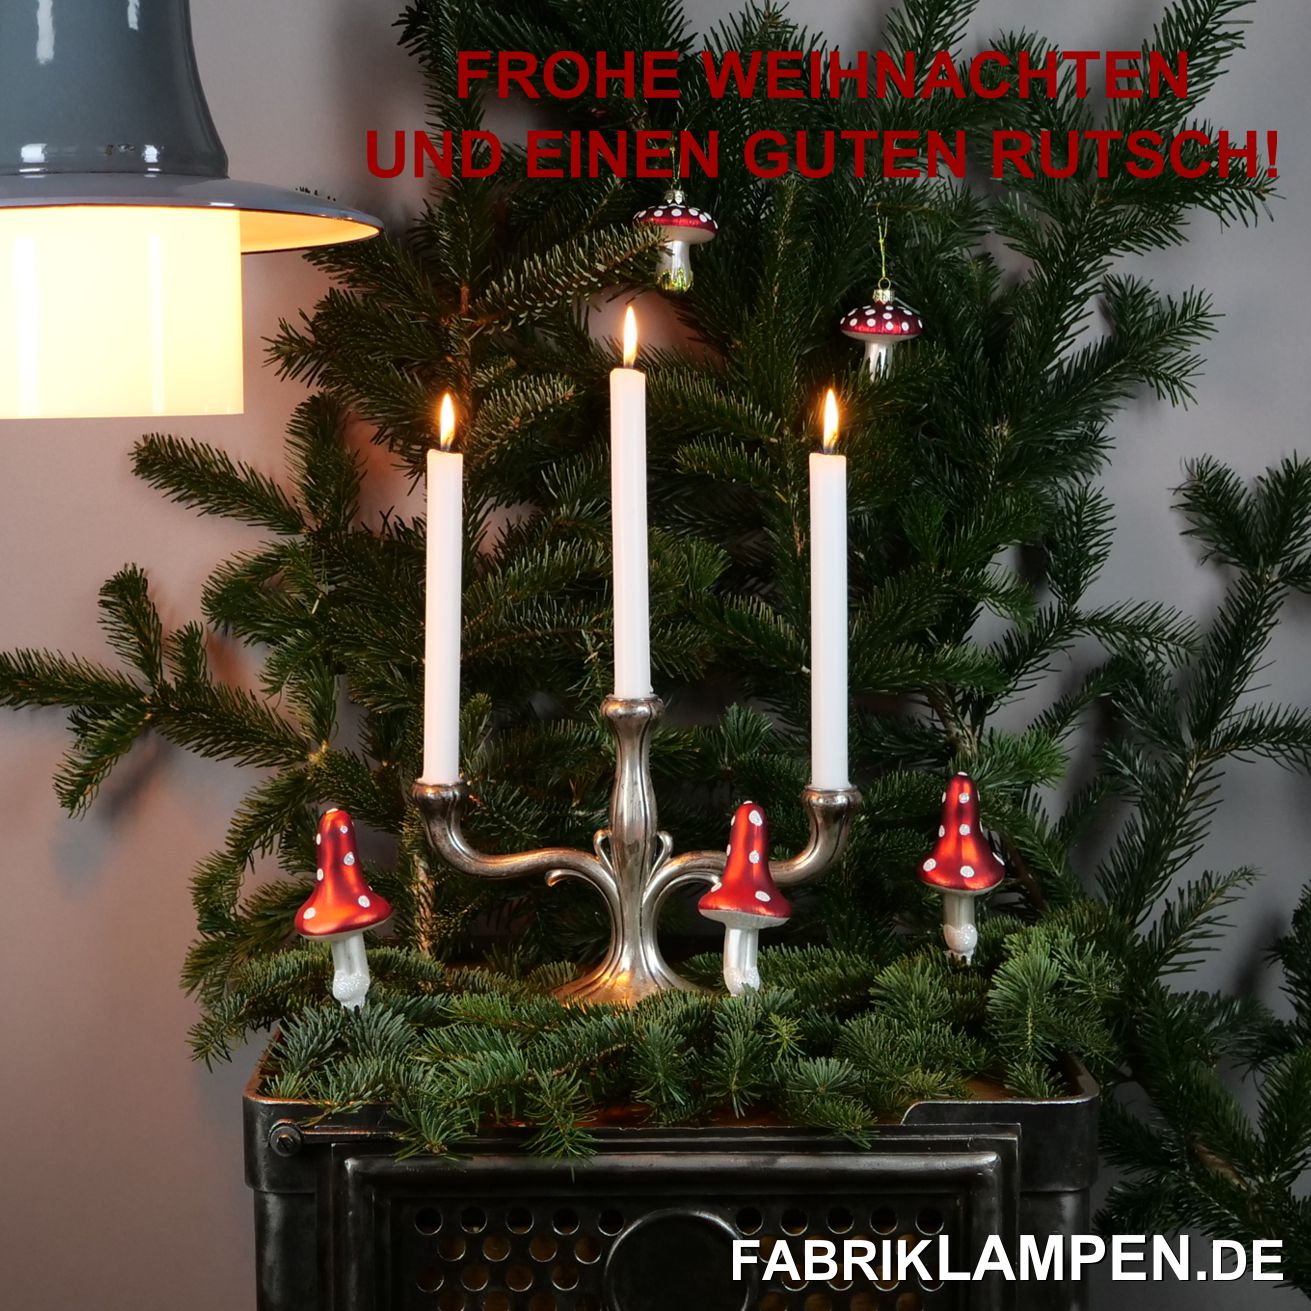  Merry Christmas with fabriklampen.de! We wish our visitors and customers a wonderful Advent season, Merry Christmas and a Happy New Year 2023! As always, we show you some pictures from our activity. This week we delivered 20 restored industrial lamps for a loft living project in Rhenland-Pfalz. In the large living area, these old industrial lamps provide light. With the three-part structure, the connection between the neck and the shade and the perforated neck, these fabriklampen have a strong industrial character. The lovingly restored old industrial lamps are equipped with a graphite gray textile cable, we also supplied the chains. For the individual attachment to the ceiling, the client had individual metal parts made. Factory lamps have been supplied with cast steel suspension with porcelain roller. The 4 gray-blue factory lamps are intended for the tech and supply rooms and guest rooms. These lamps are quite rare: instead of having a cast iron housing, here the thread for the lamp glass has been pressed into the sheet metal. These industrial lamps have also received a cast steel suspension with porcelain roller. Famous these old factory lamps for the logo and manufacturer information on the shade. On these industrial lamps the lettering is quite large. Above you can see the stag ( Hung. Szarvas), in some versions of these industrial lamps you can see a star(scale). We have mounted the cast steel suspension with brass parts on these lamps, as the overall look is softer that way. In the large black factory lamps in the living area, these small parts are made of stainless steel, which fits better with the minimalist interior with raw concrete surfaces. In the kitchen hang four of these very rare factory lamps. We have been able to buy many well-preserved examples from a factory in Hessen – even with the original lamp glasses, which is an absolute highlight. In these industrial lamps all parts are original, only – as always – the complete interior is new. The factory lamps are mounted with wine red textile cable. Simple beauty of the old factory lamps and subtle light thanks to lamp glasses – we wish you happy holidays! 